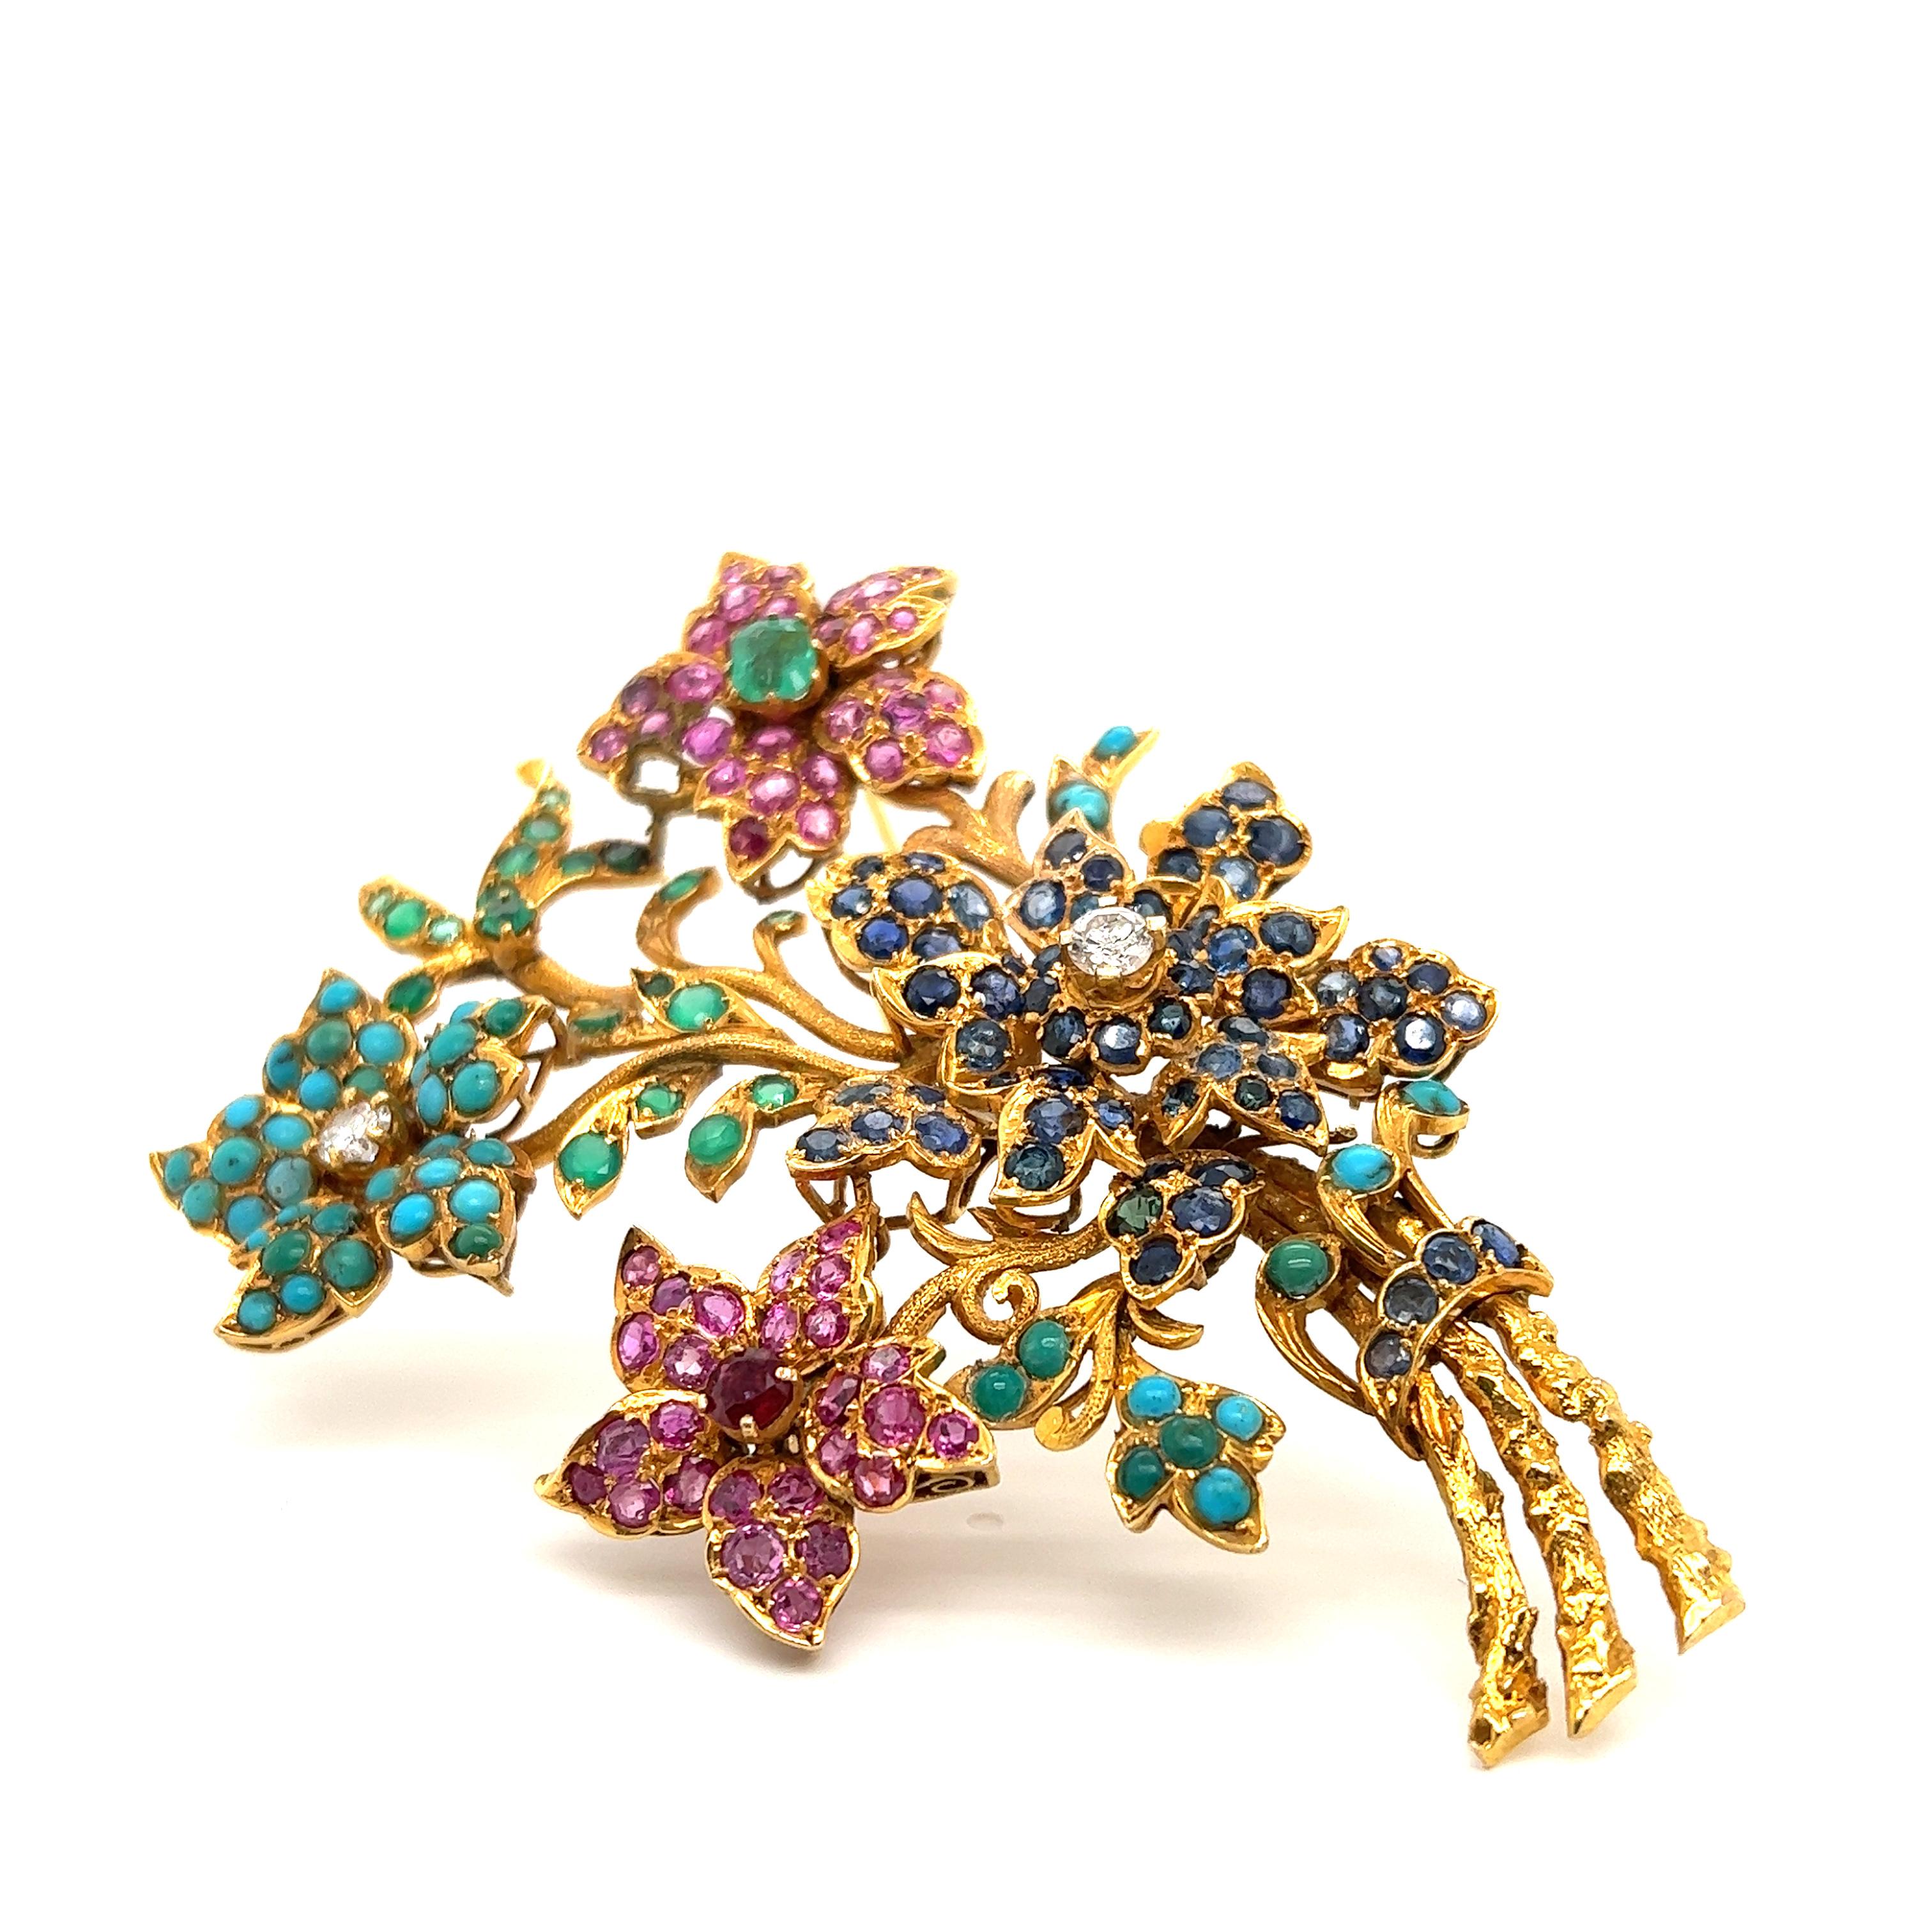 Fantastic design seen on this retro treasure. This brooch is crafted in the theme of a floral arrangment and is a large design! The brooch measures approximately 3.5